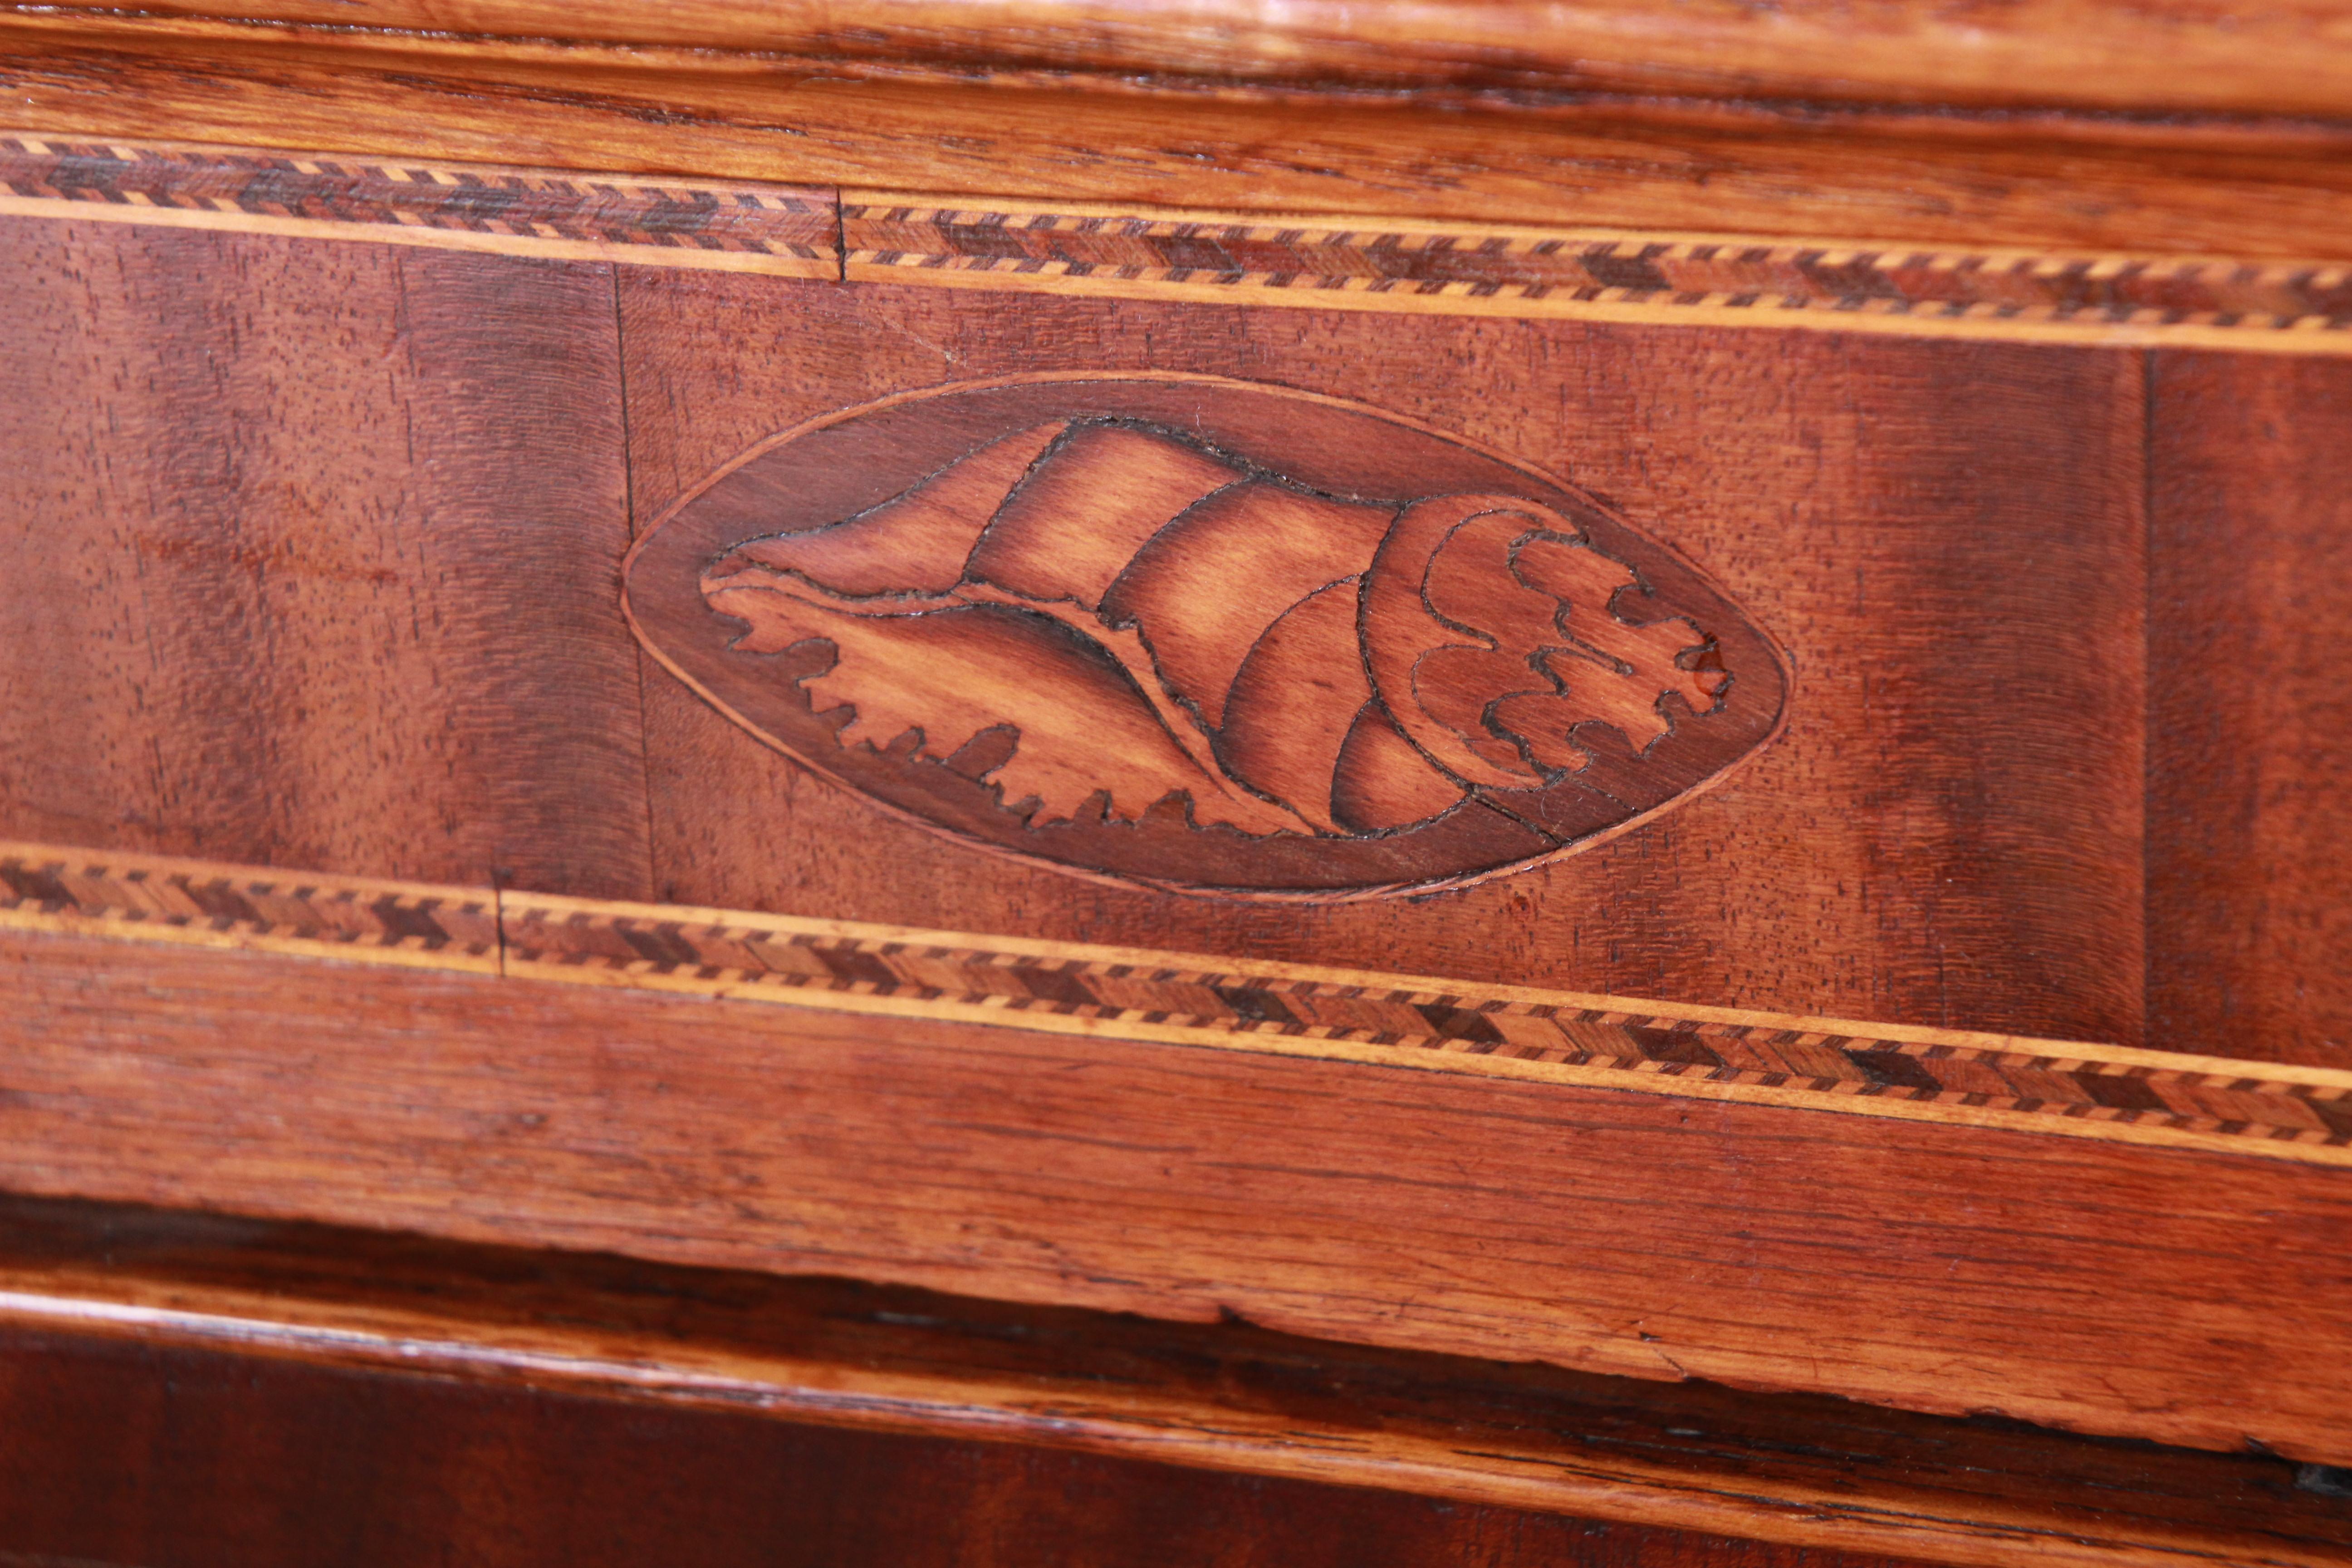 19th Century Early American Oak, Inlaid Mahogany, and Bone Inlay Chest of Drawers, circa 1820